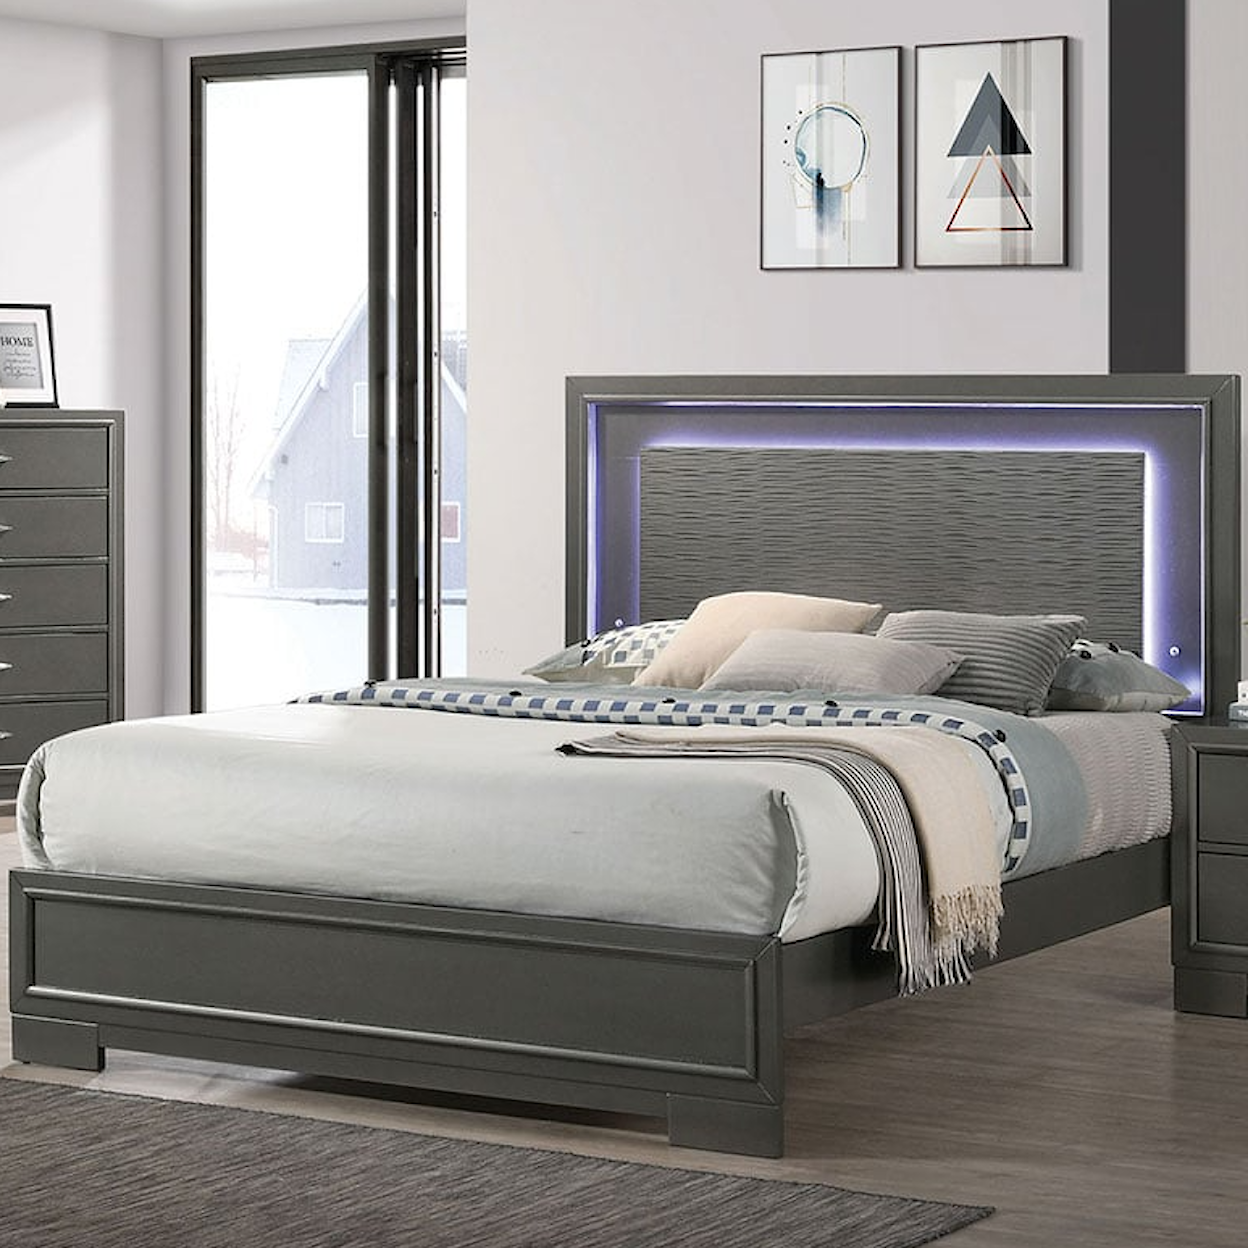 Furniture of America Alison King Bed